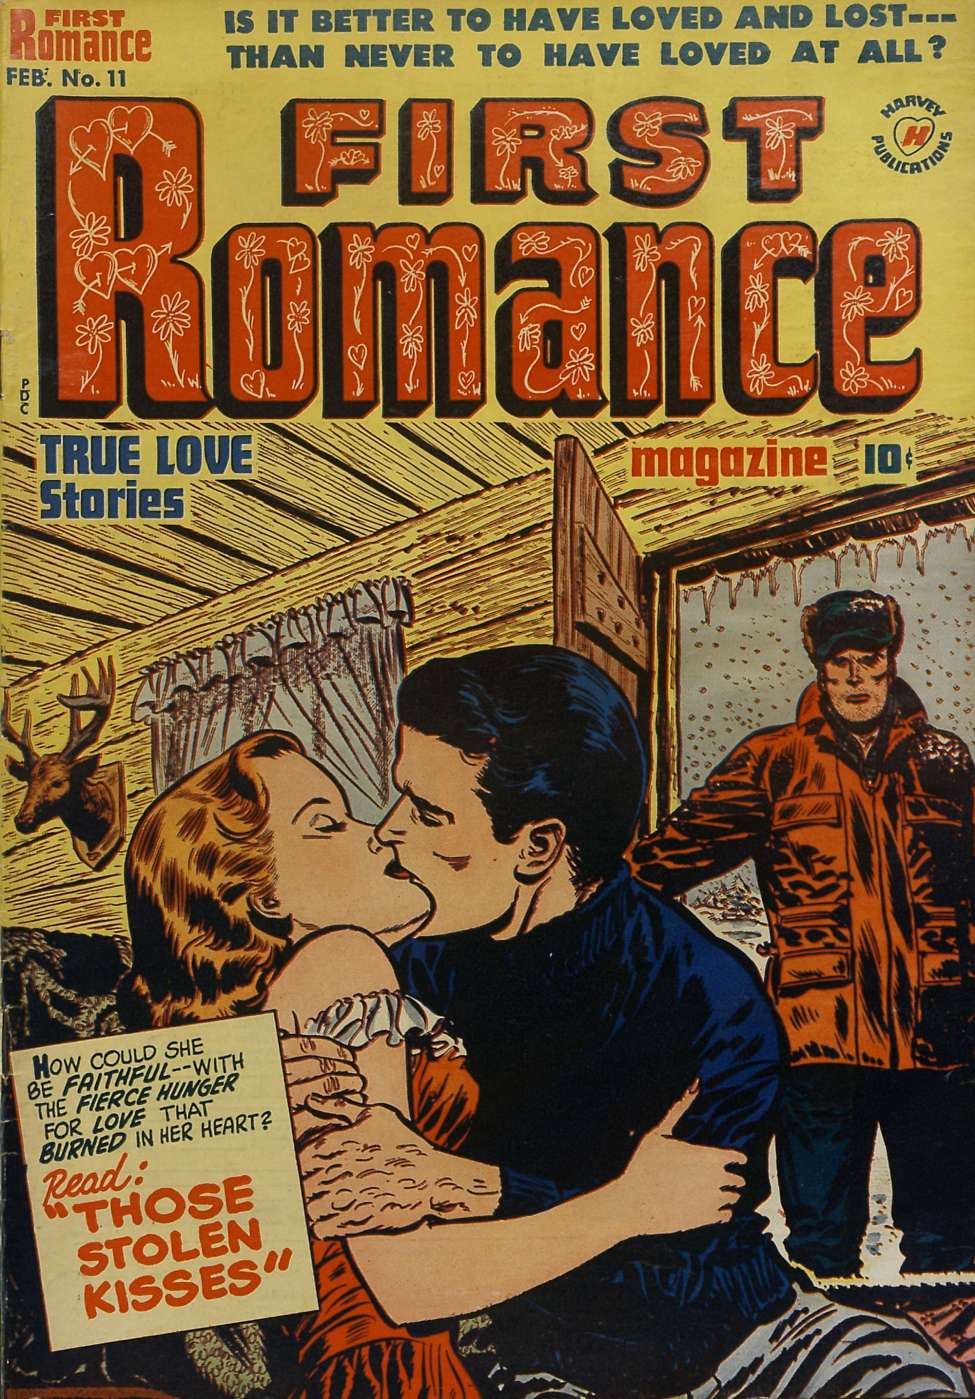 Book Cover For First Romance Magazine 11 - Version 2